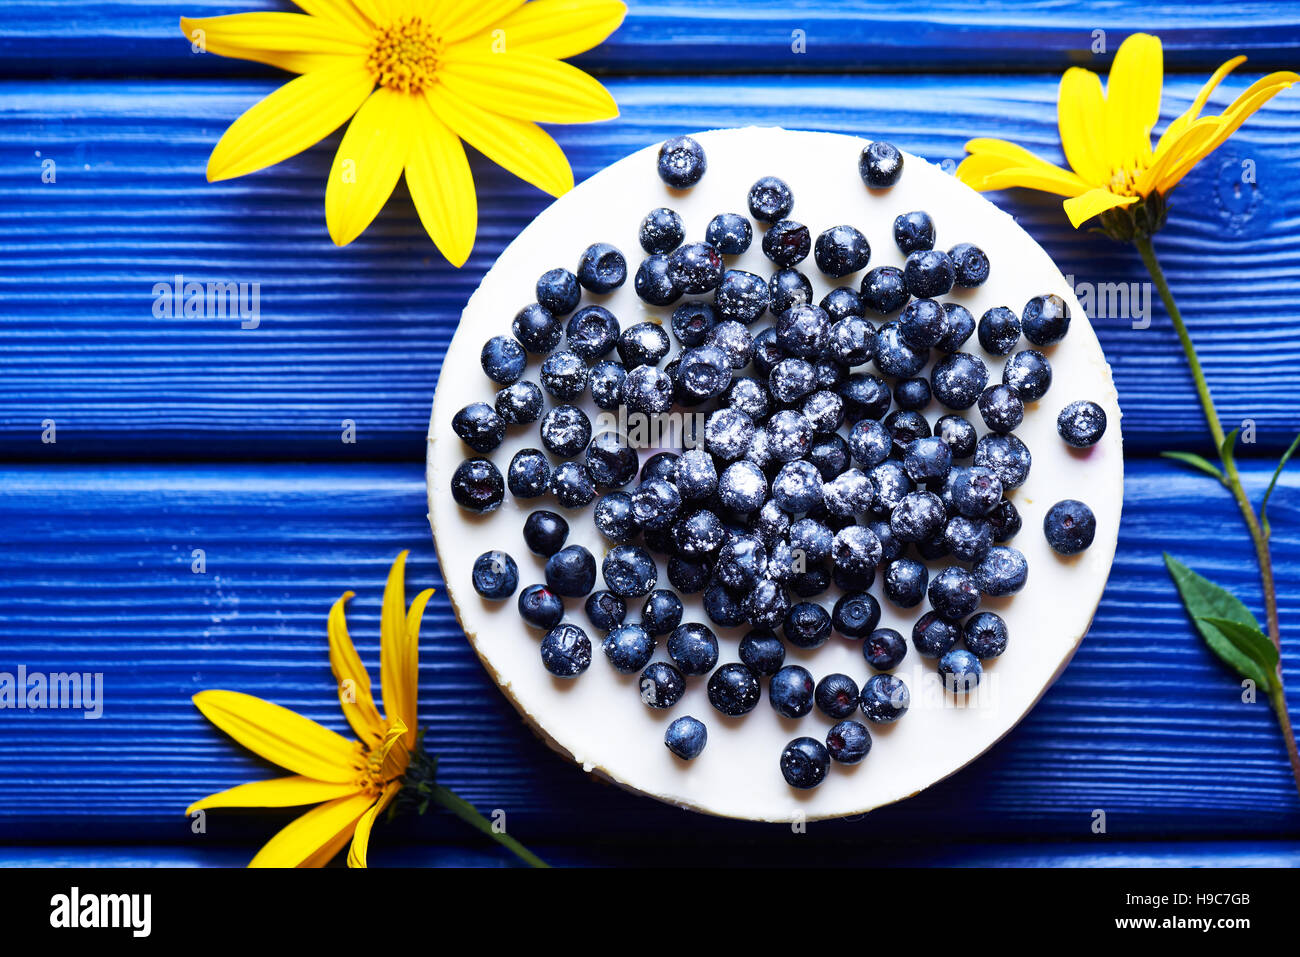 Sweet creamy blueberry cheesecake with fresh blue berries on a blue wooden background with yellow flowers. top view. Stock Photo